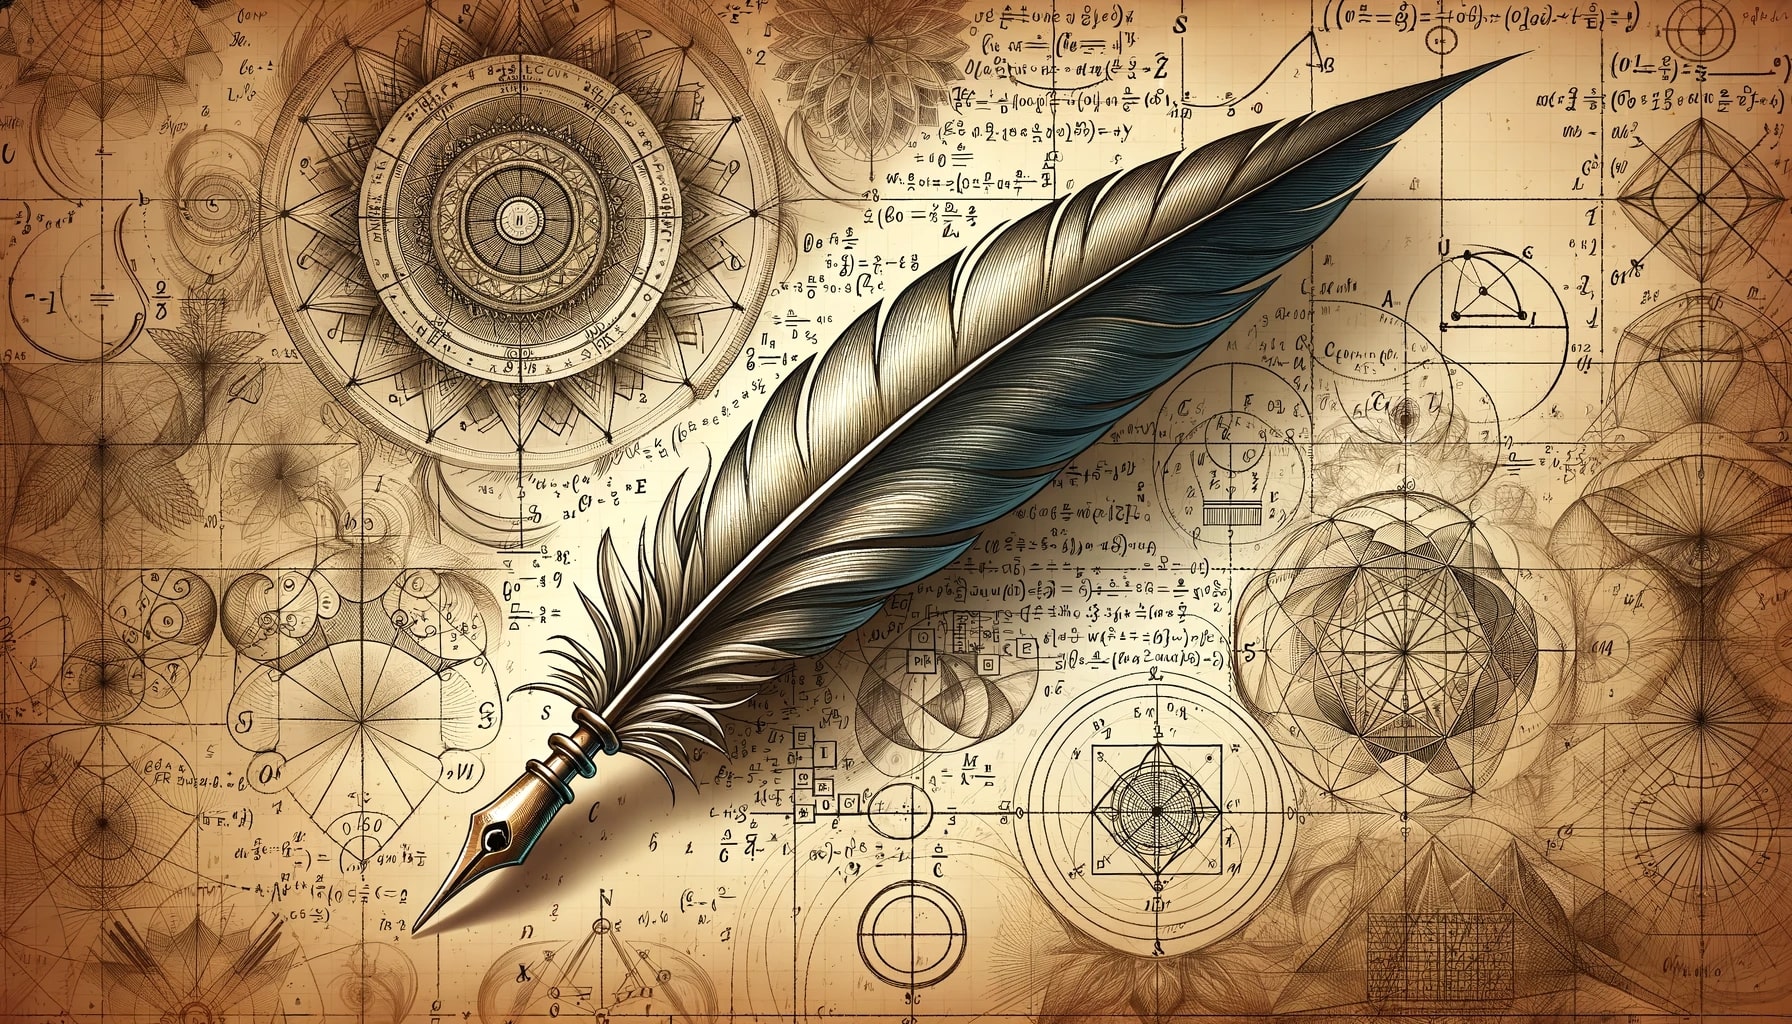 An image showing a quill surrounded by elaborate mathematical writing and complex mathematical diagrams. 